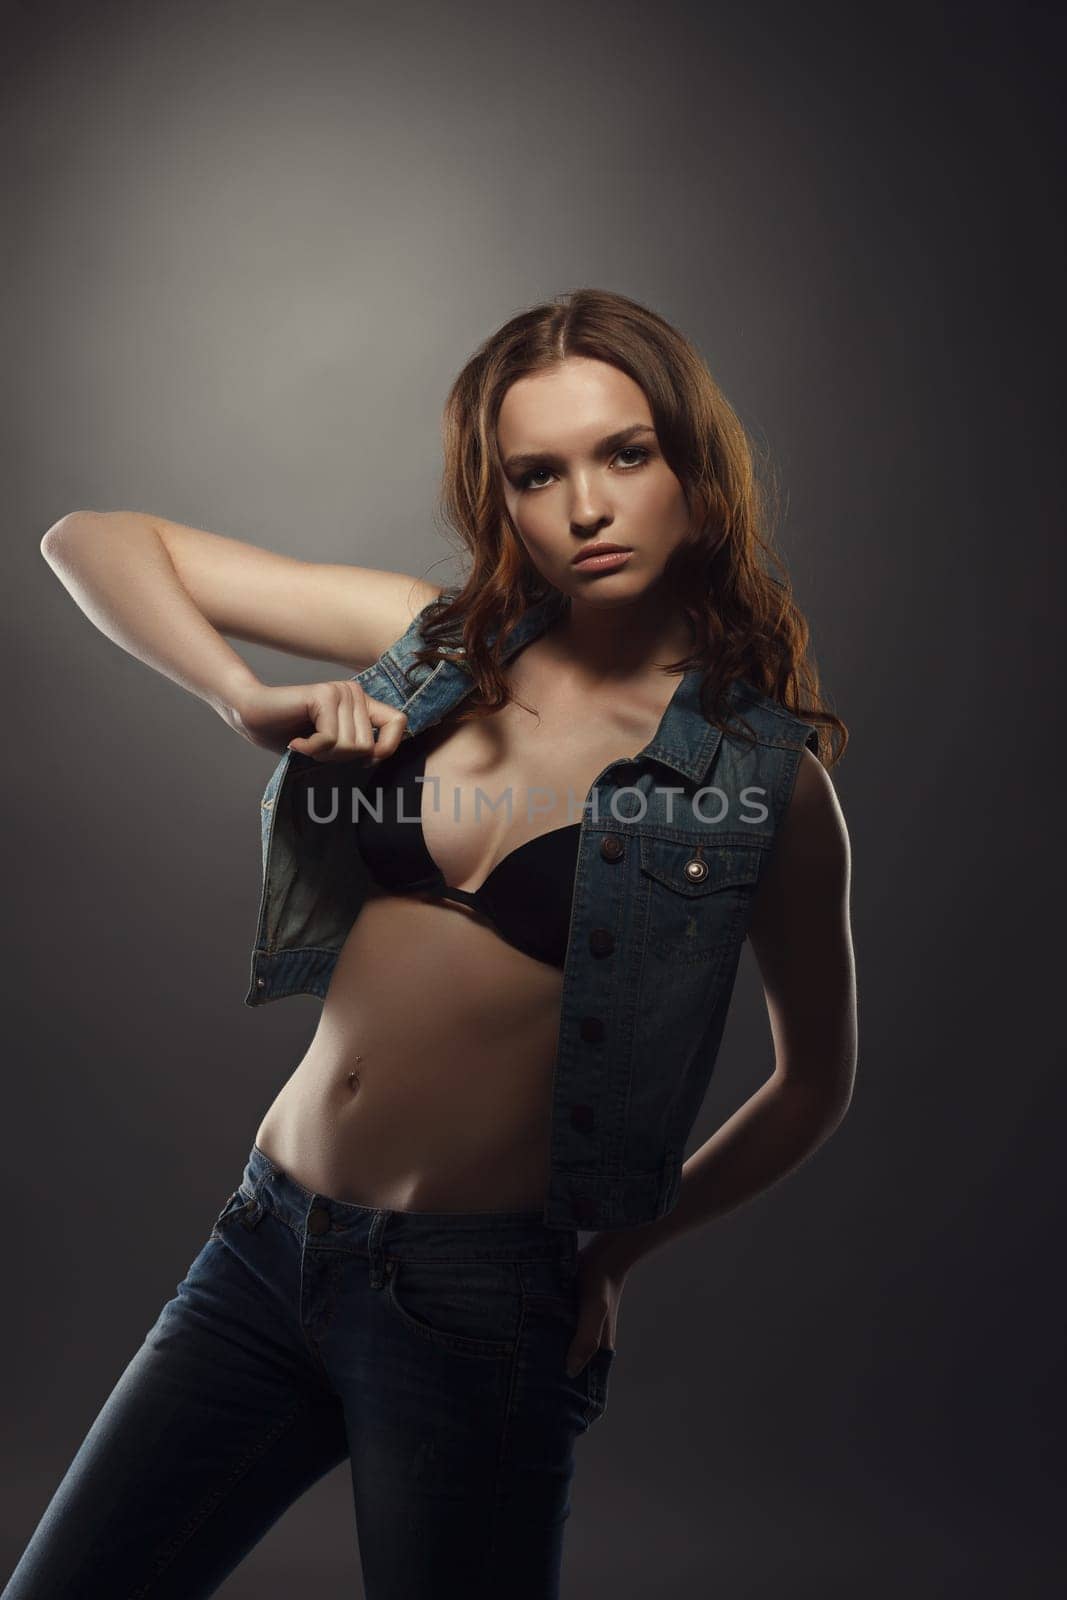 Attractive young girl posing at fashion casting. Studio photo